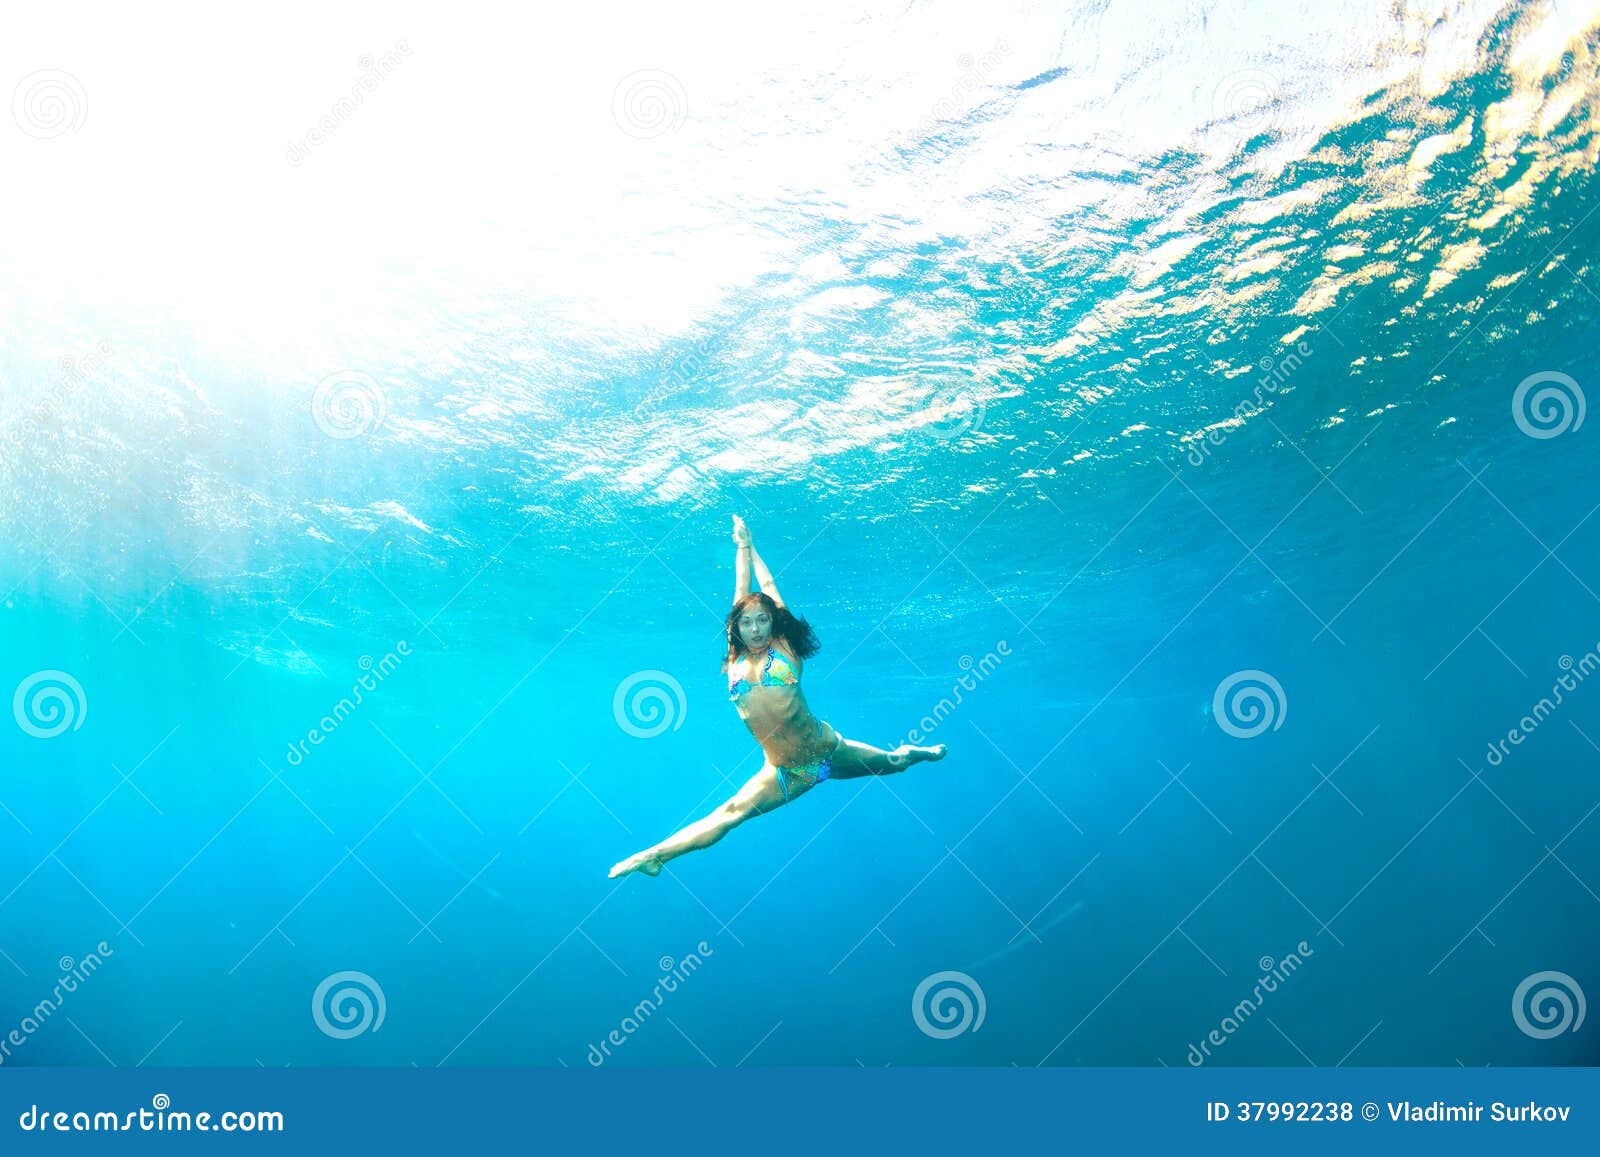 Underwater jumping stock photo. Image of background, athletic - 37992238